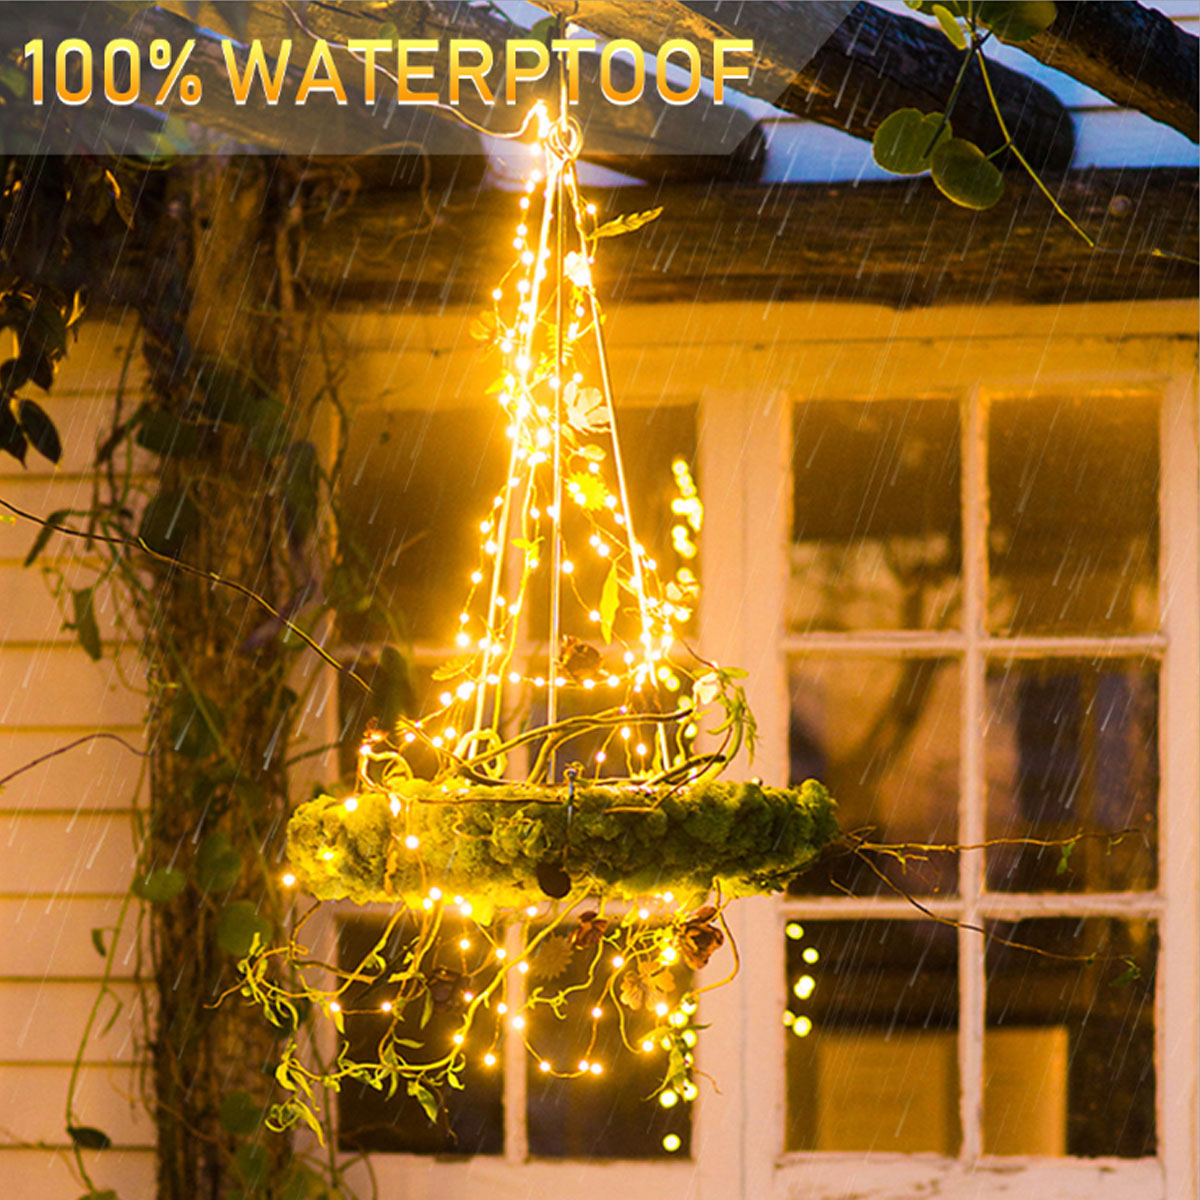 300400-LED-Waterproof-Colorful-Light-Fairy-String-Rope-Solar-Lights-Outdoor-1729916-5